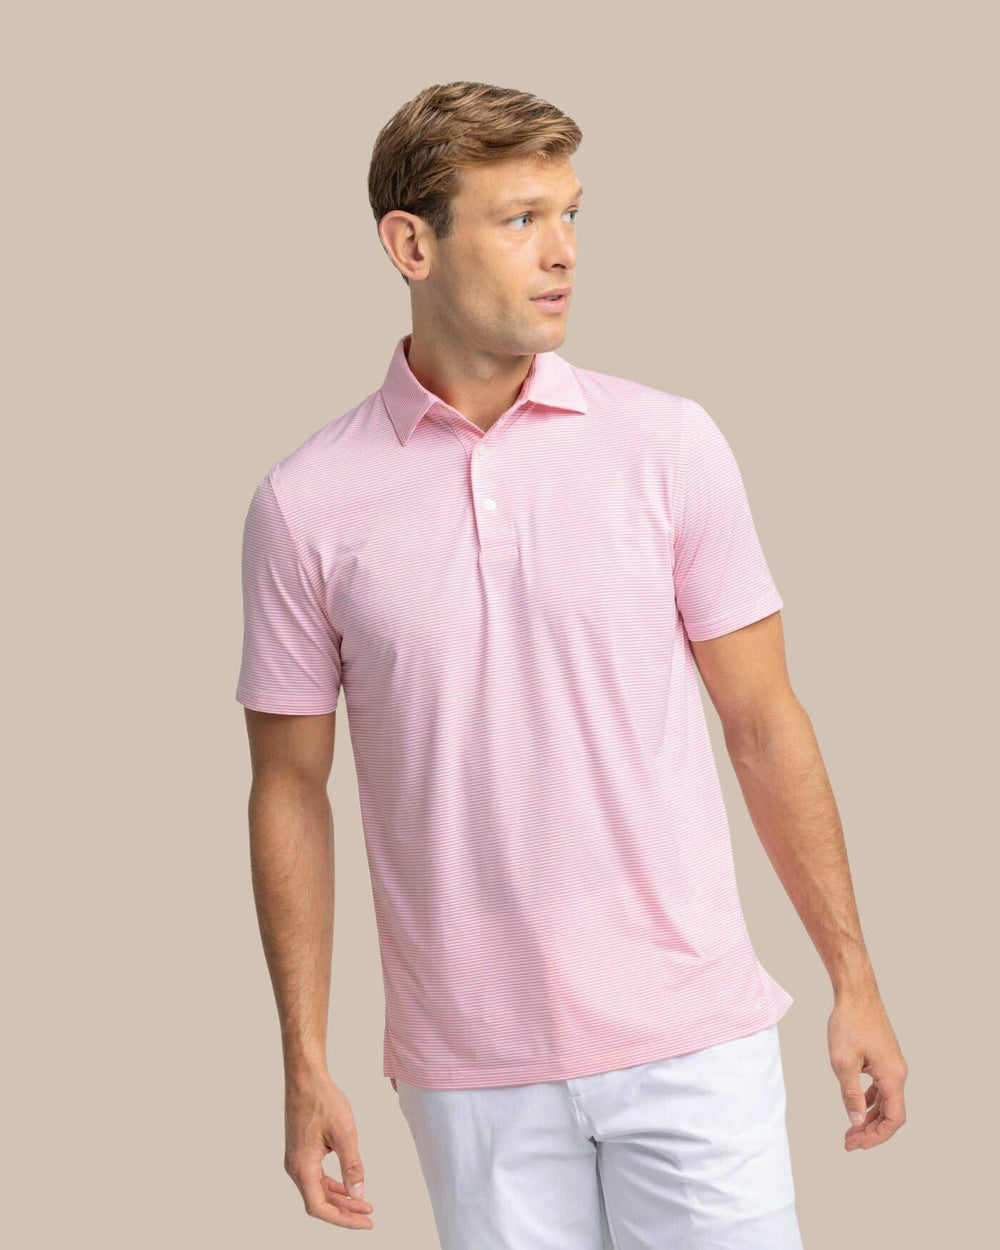 The front view of the Southern Tide brrr-eeze Meadowbrook Stripe Polo by Southern Tide - Geranium Pink